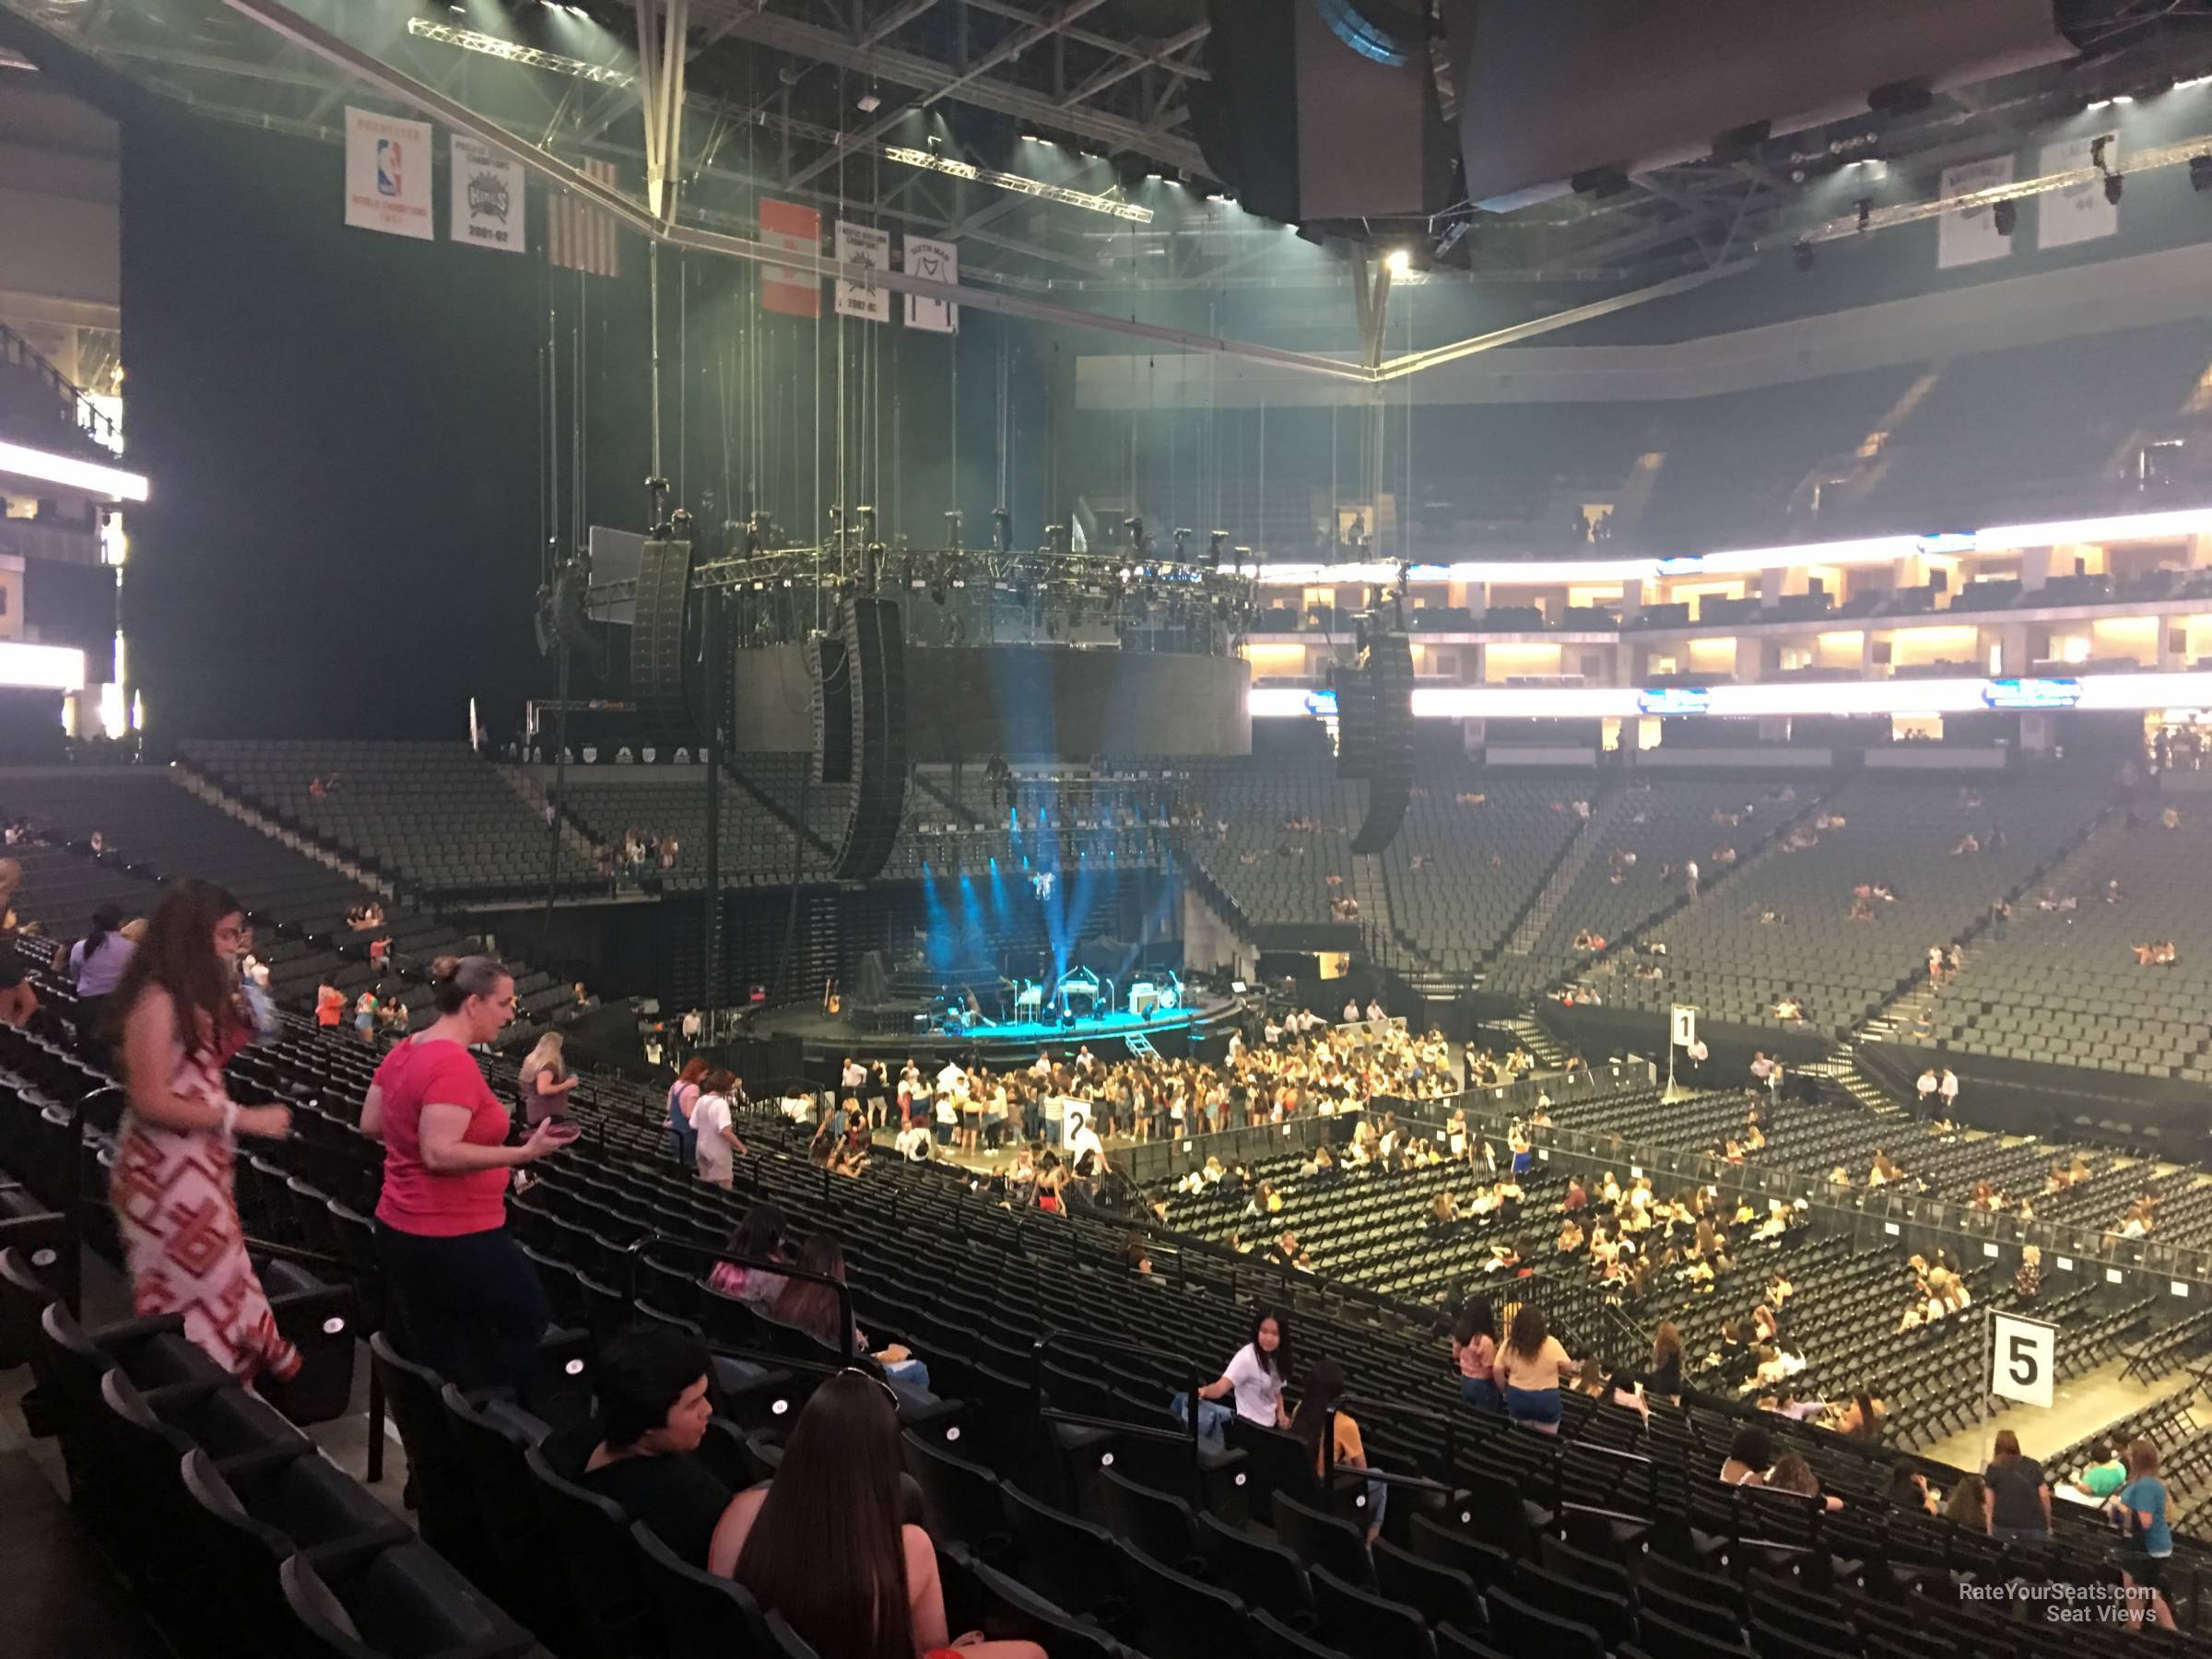 section 118, row v seat view  for concert - golden 1 center